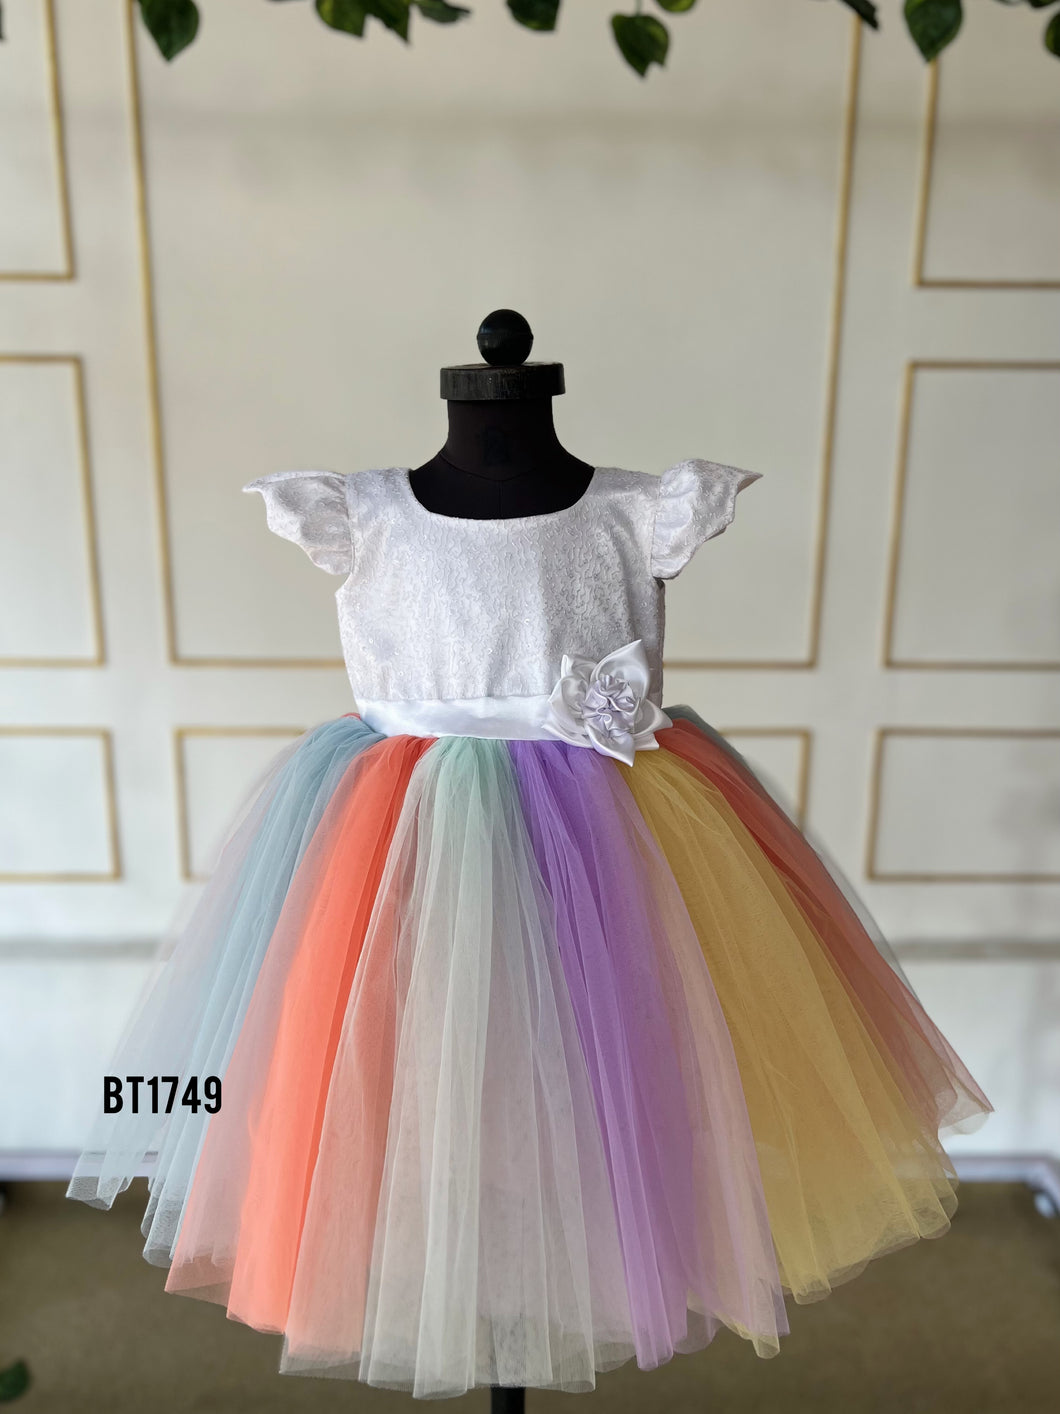 BT1749 Rainbow Whimsy Dress - Your Little One's Dream in Colors